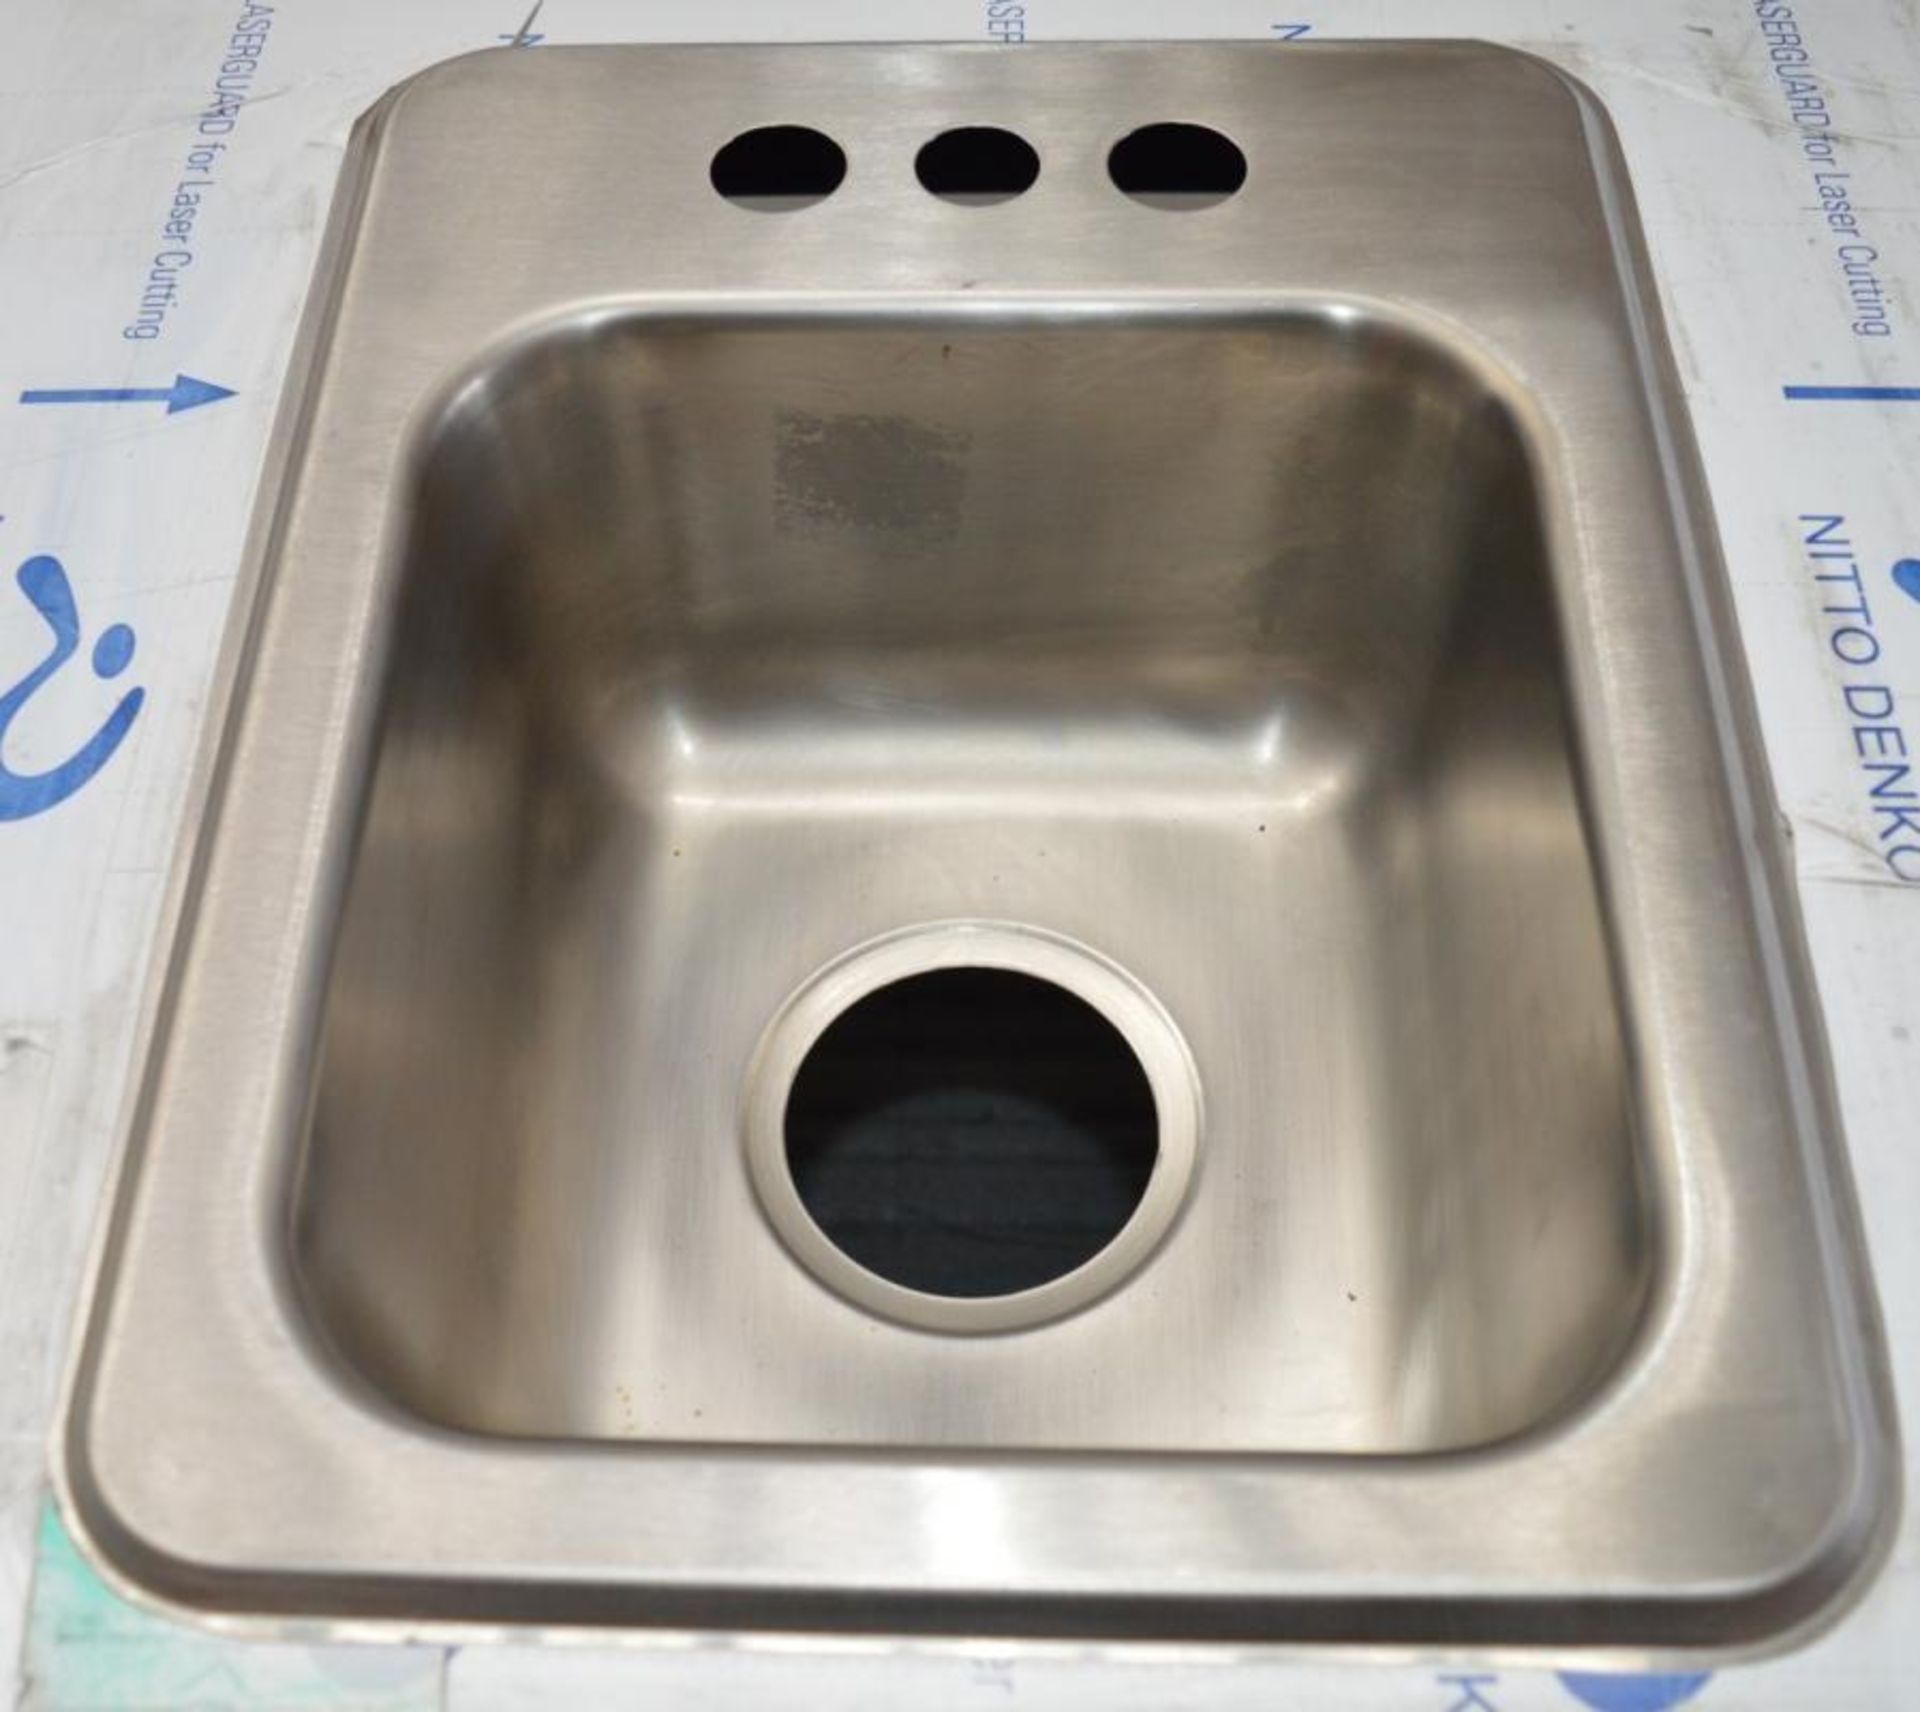 1 x Duke Stainless Steel Sink Basin Unit With Wood Finish Cabinet - Unused With Protective Film Atta - Image 3 of 7